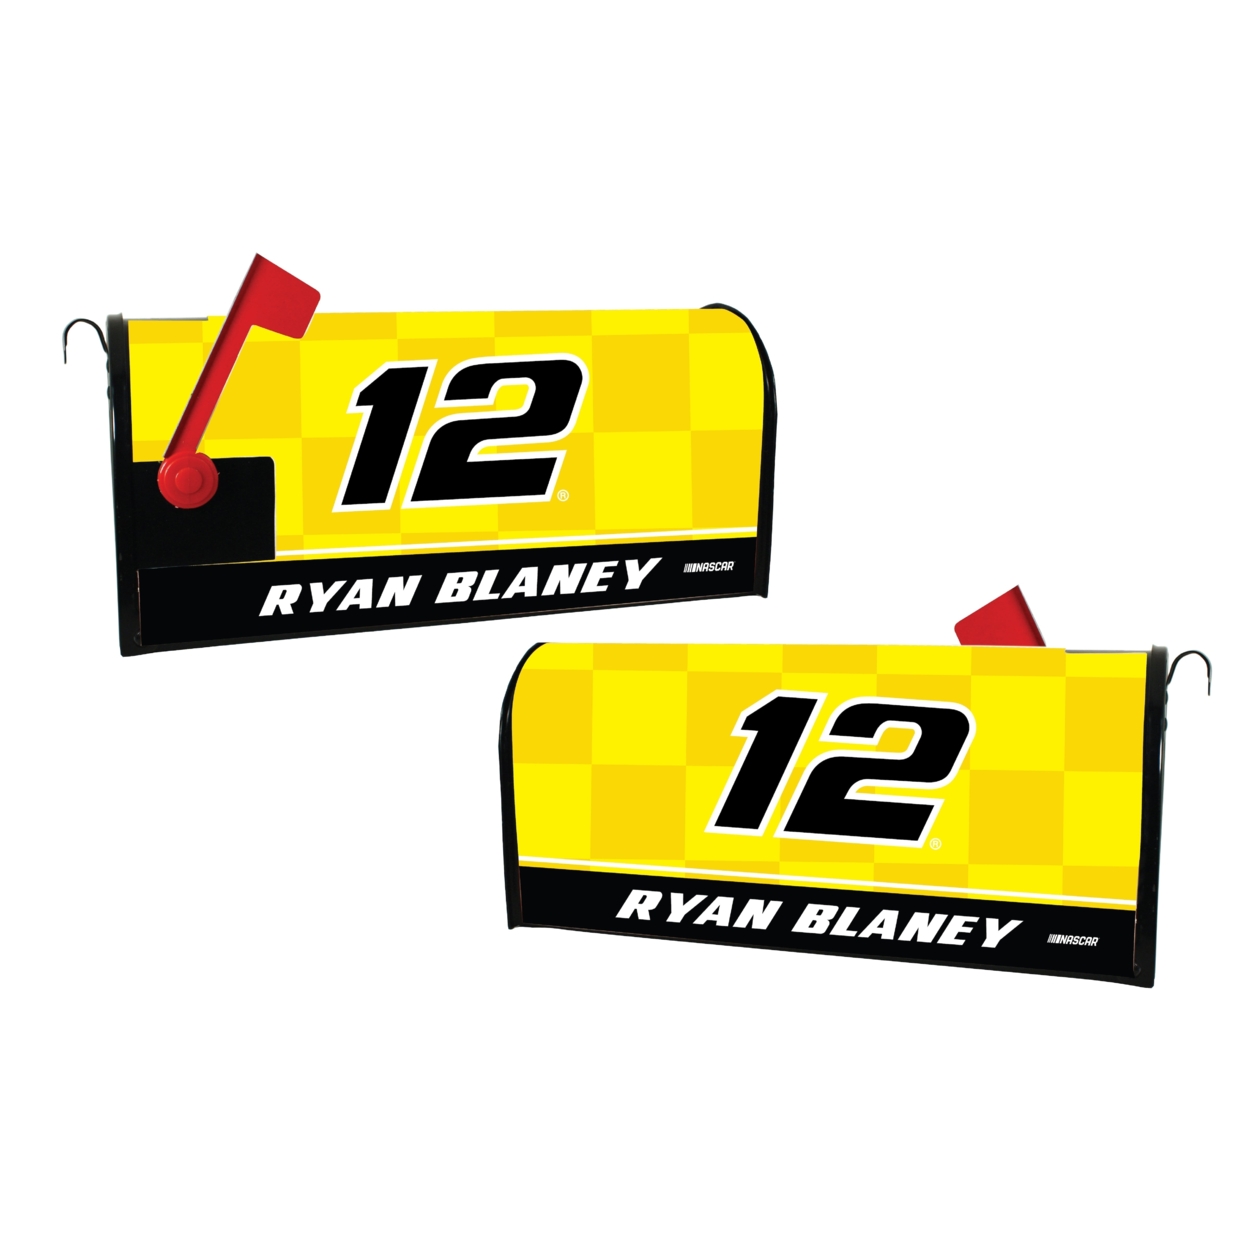 Nascar #12 Ryan Blaney Mailbox Cover Number Design New For 2022